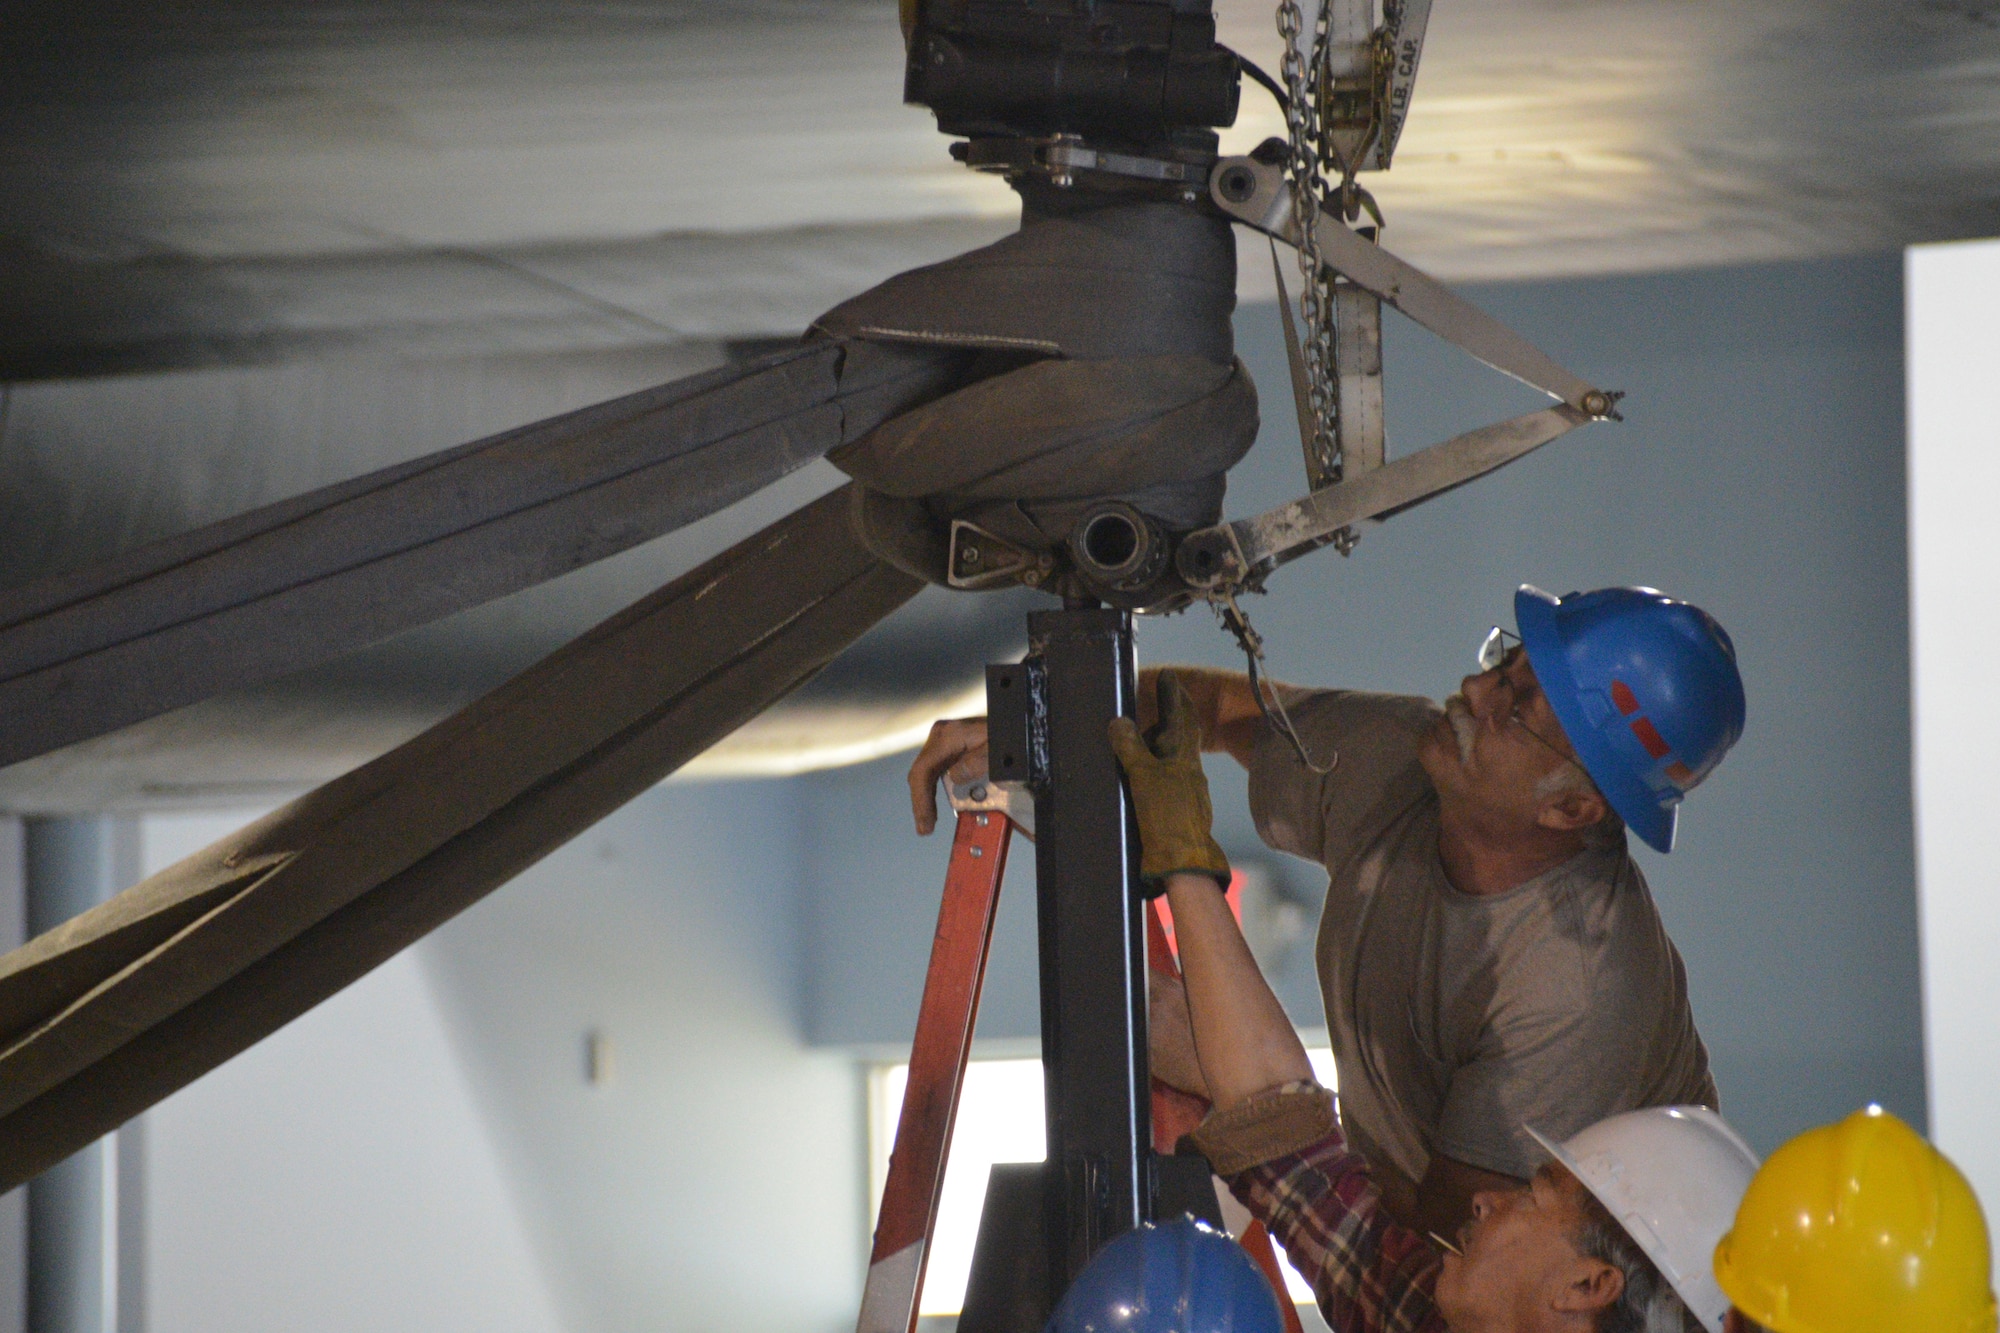 Doug Monahan (blue helmet) and Paul Kalani (white helmet) inspect the fitting of the nose wheel stand mount for proper alignment during the lifting of the SR-71 onto three lift stands into a takeoff profile at the Museum of Aviation at Robins Air Force Base. The lift was conducted by Crash, Disabled, Damage and Recovery Team personnel from the 402nd AMXG, 116th ACW and 461st ACW. (U.S. Air Force photo by Edward Aspera/Released)